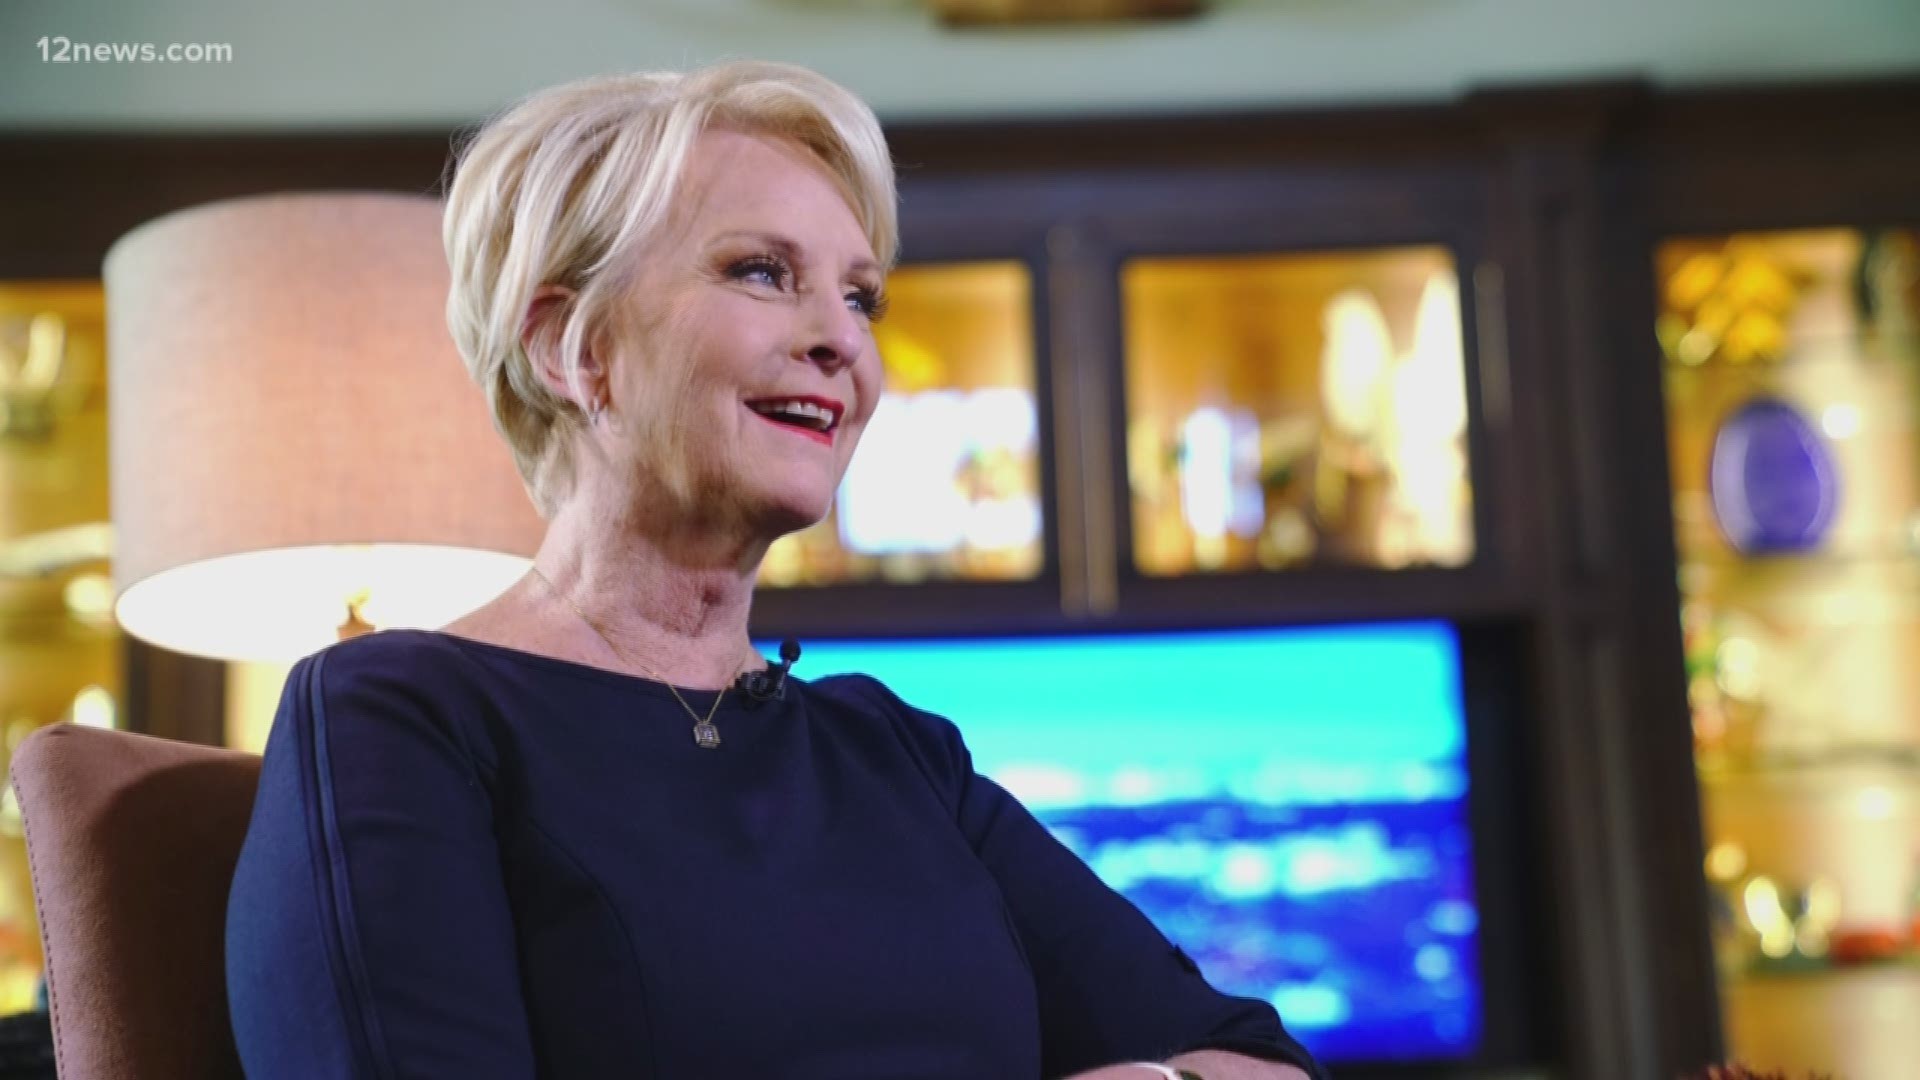 A year after the passing of Arizona's Senator John McCain, his wife, Cindy McCain, remembers his legacy and reflects on the past year without him. She also reveals how the family plans to mark the anniversary and his upcoming birthday.